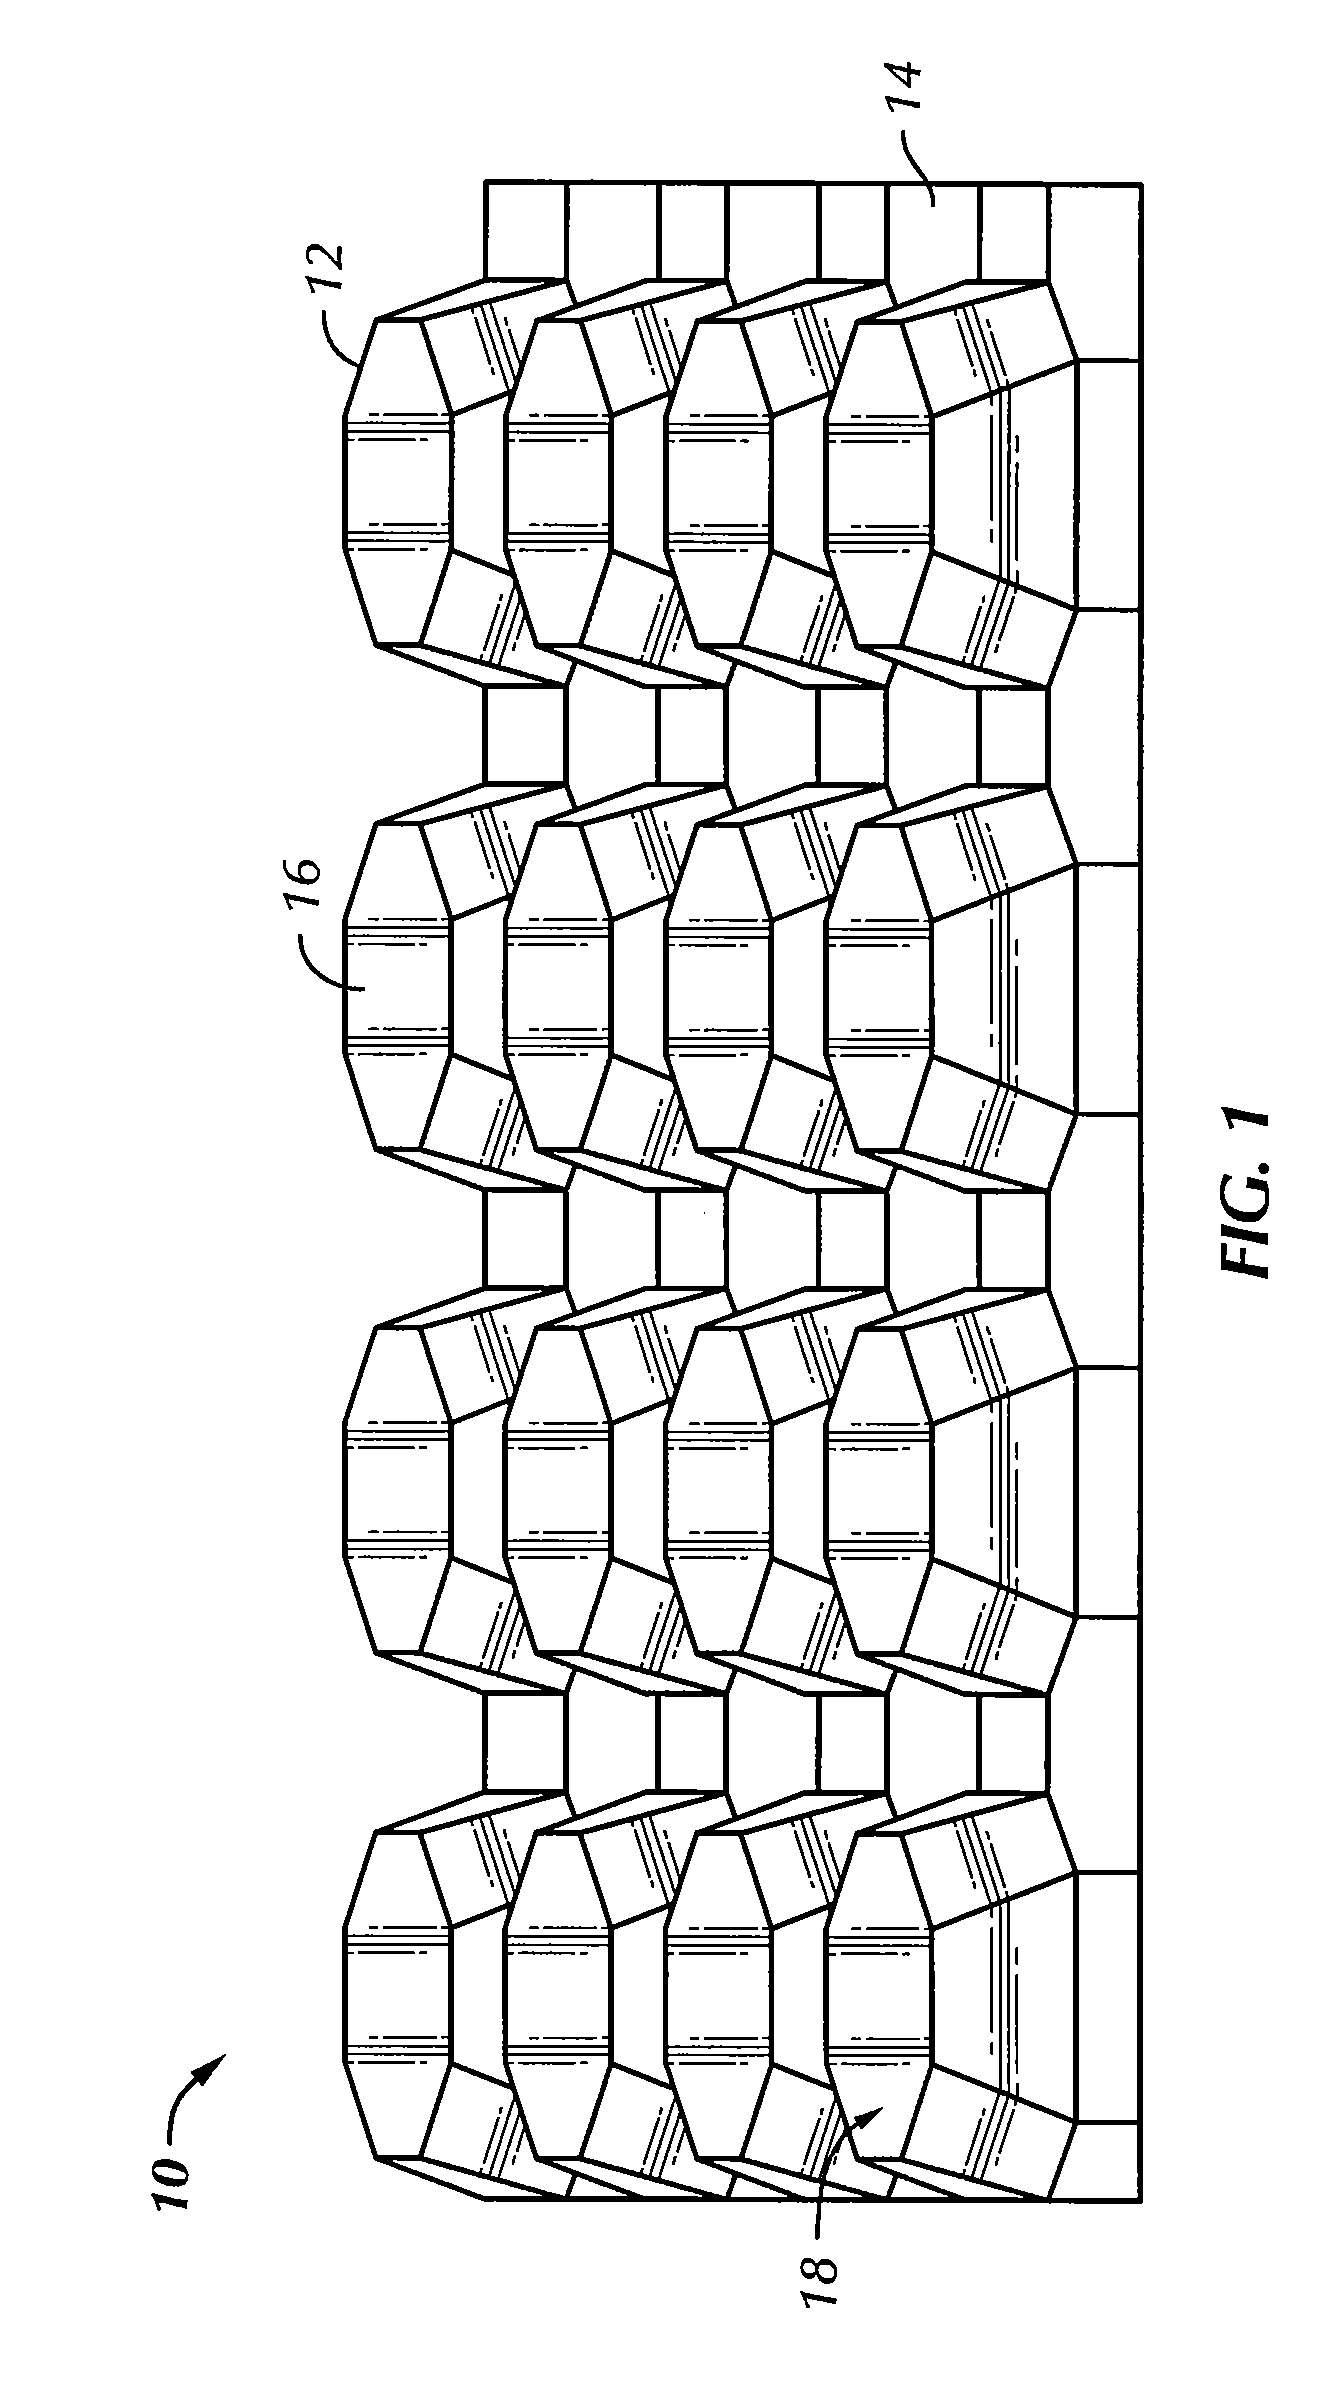 Formed core sandwich structure and method and system for making same